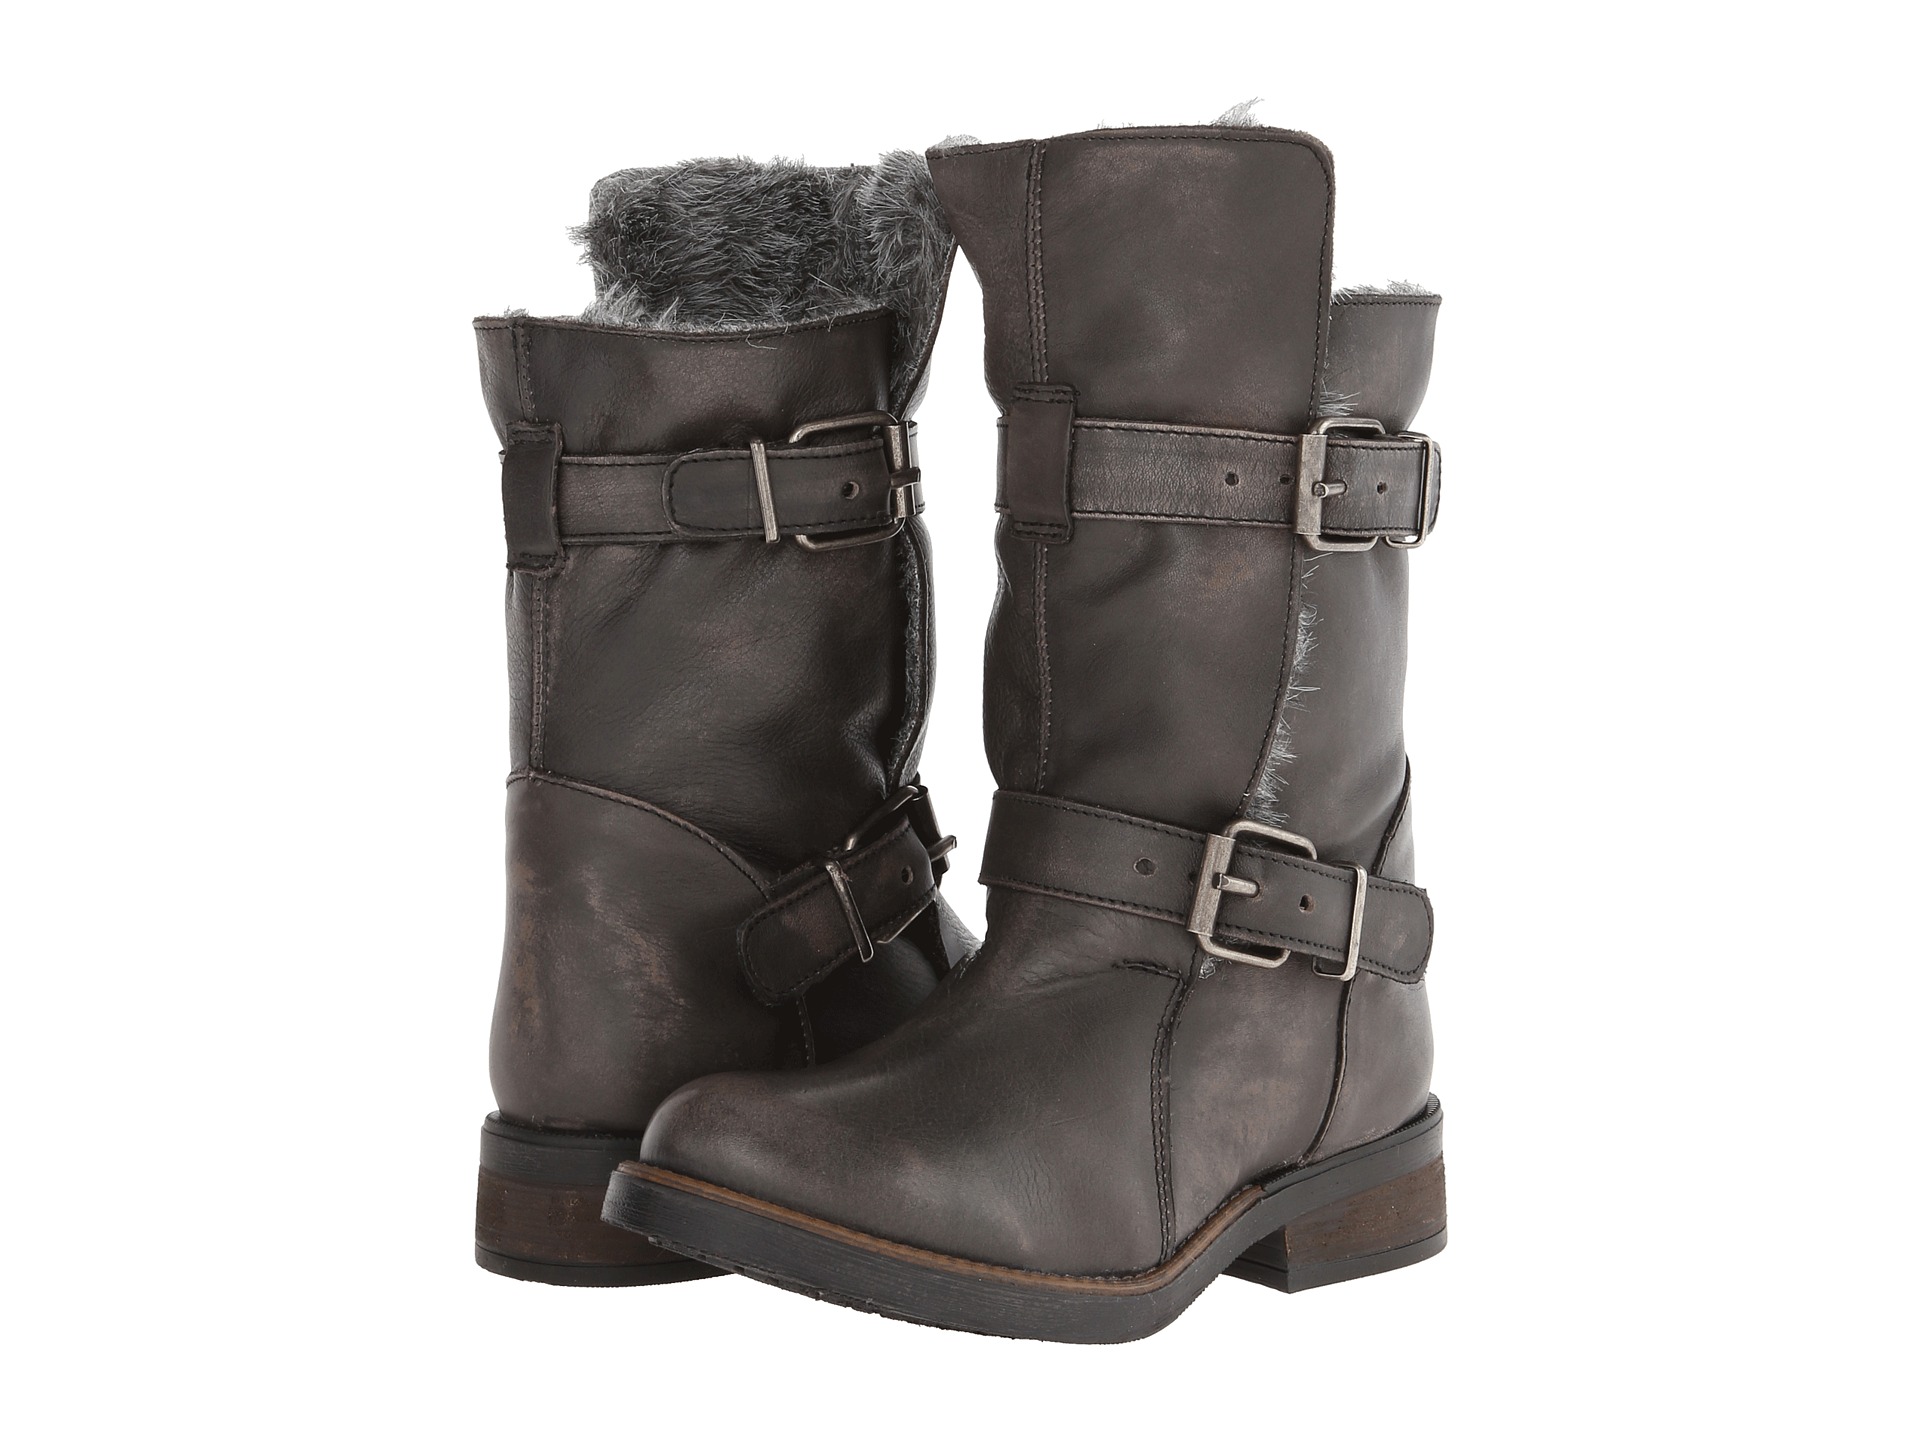 Steve Madden Caveat F Grey Multi | Shipped Free at Zappos